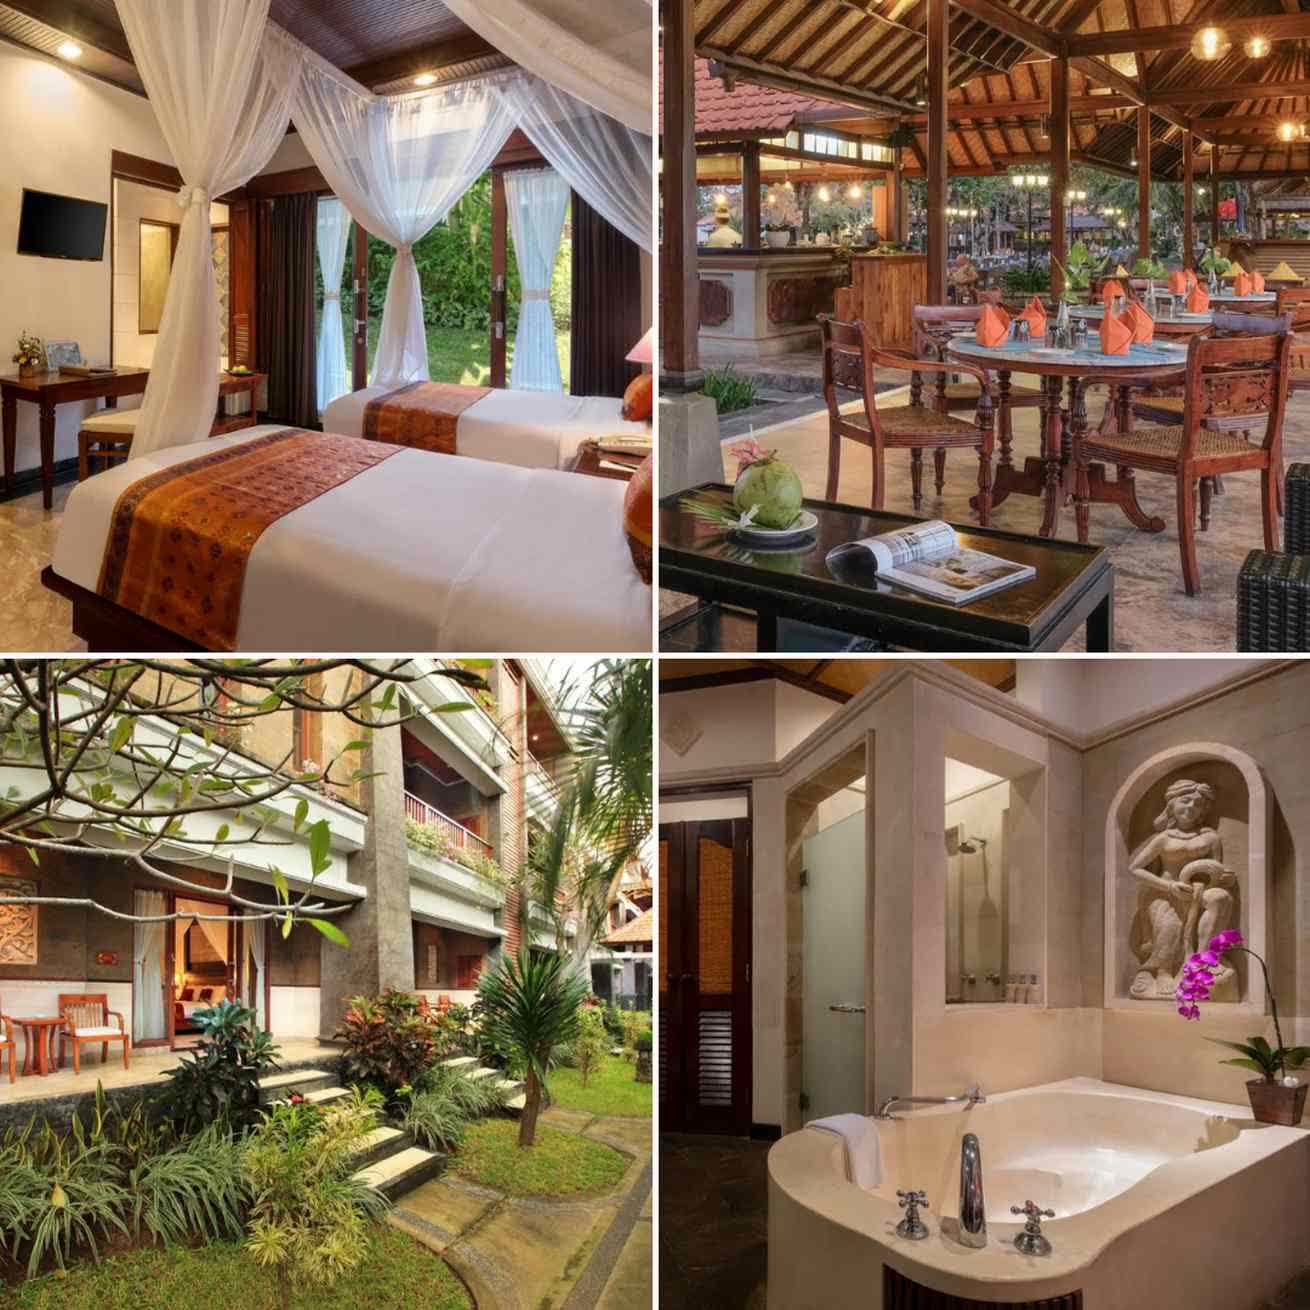 The interior of the Bali Tropic Resort and Spa and its view of the terrace and dining room